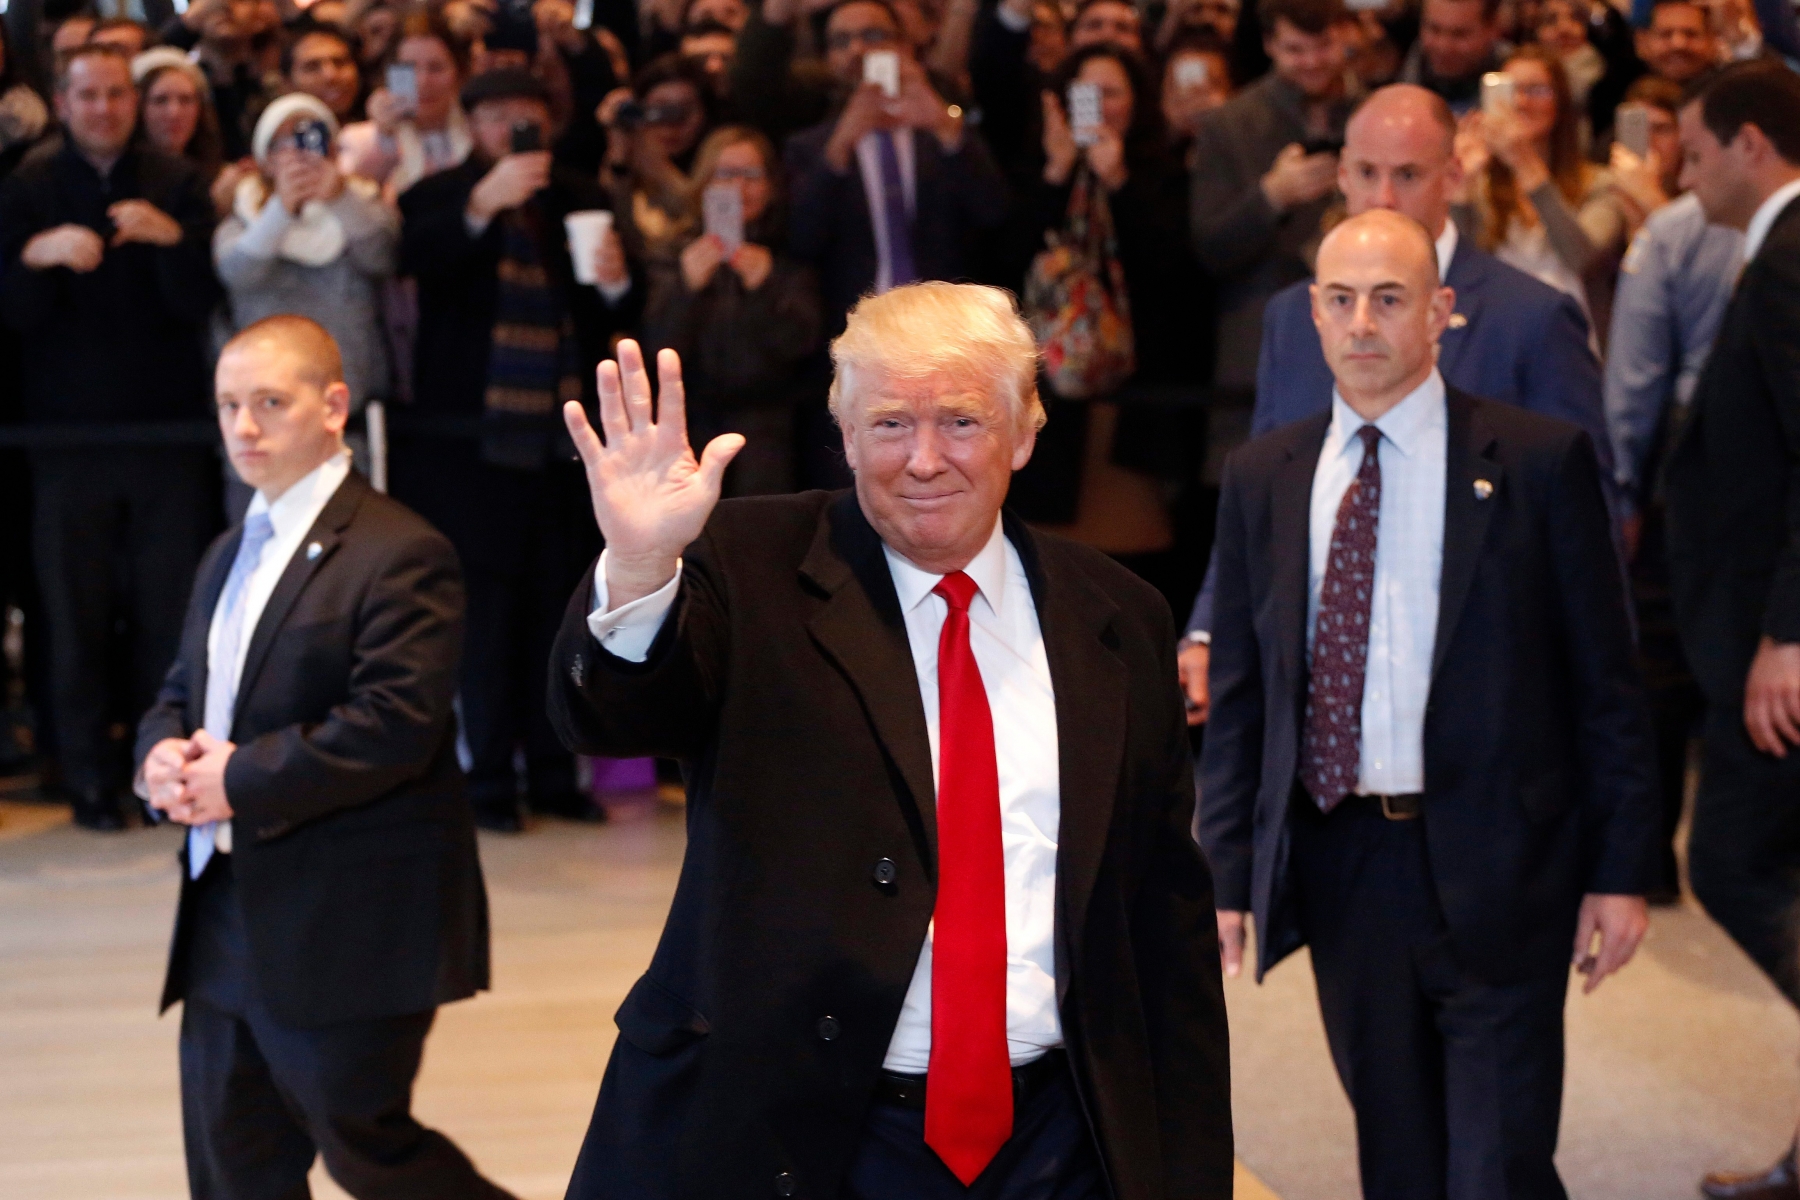 President-elect Donald Trump waves to the crowd as he leaves the New York Times building following a meeting, Tuesday, Nov. 22, 2016, in New York. (AP Photo/Mark Lennihan) Trump New York Times